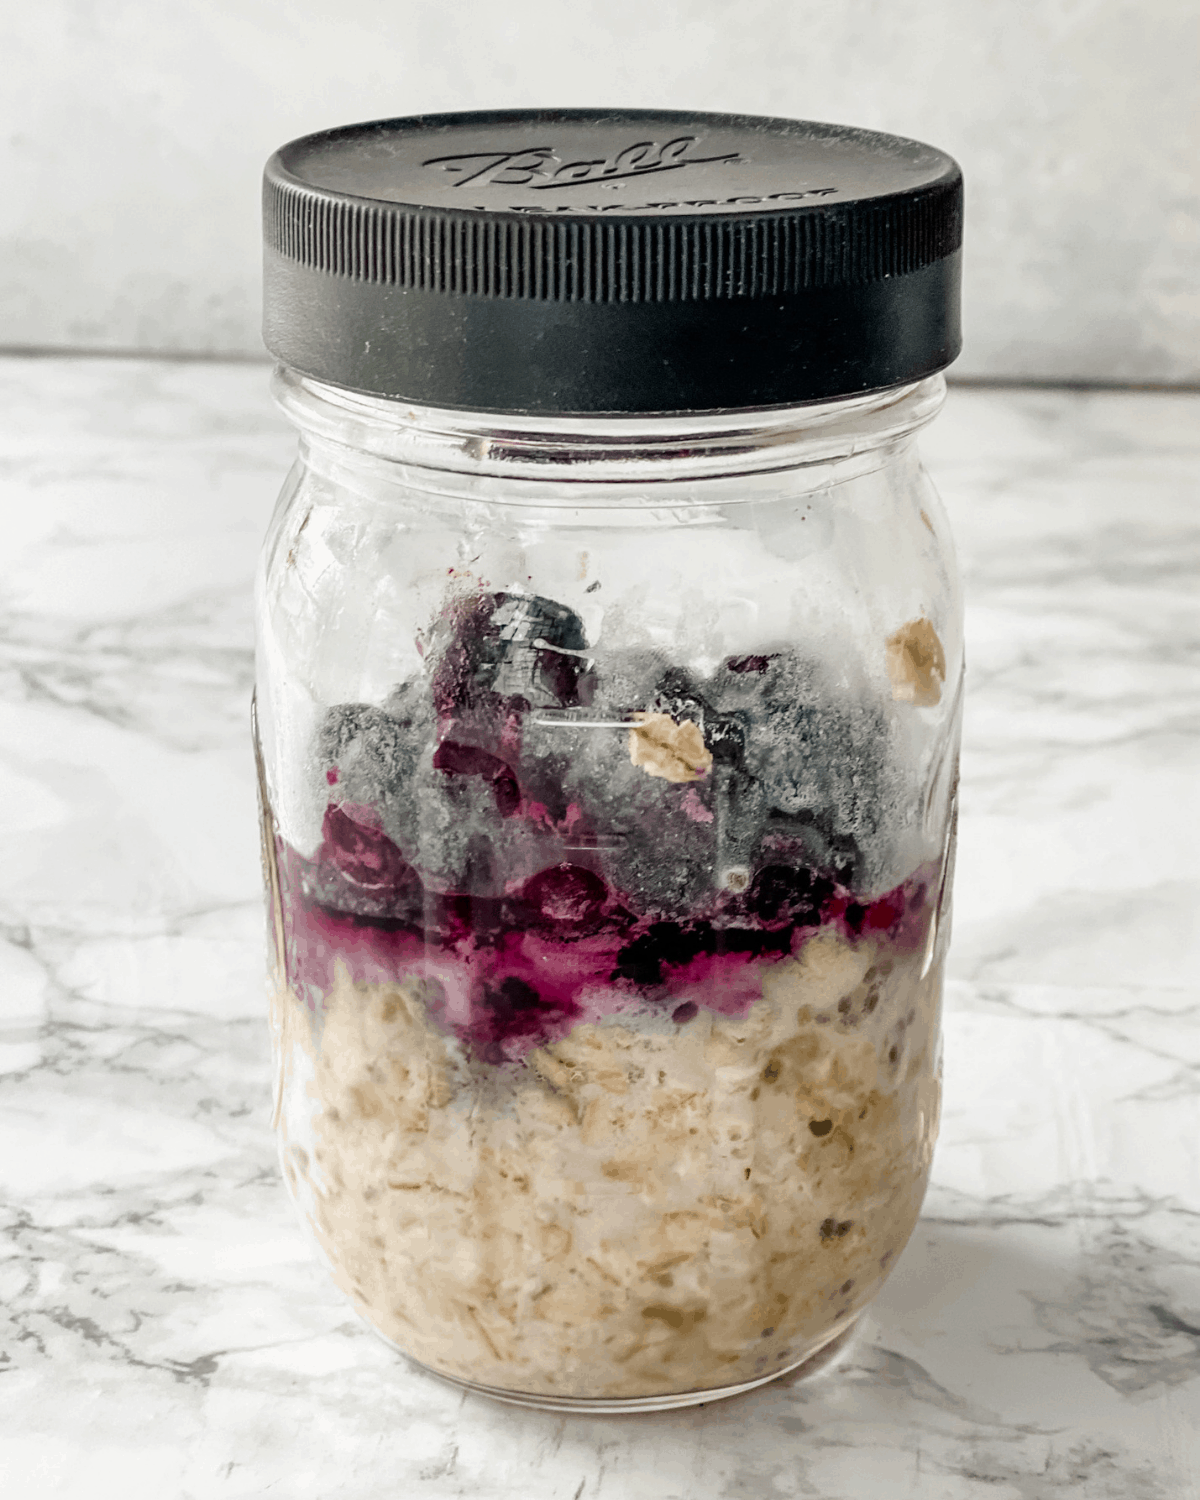 All of the ingredients for overnight oats with blueberries and banana in a jar.